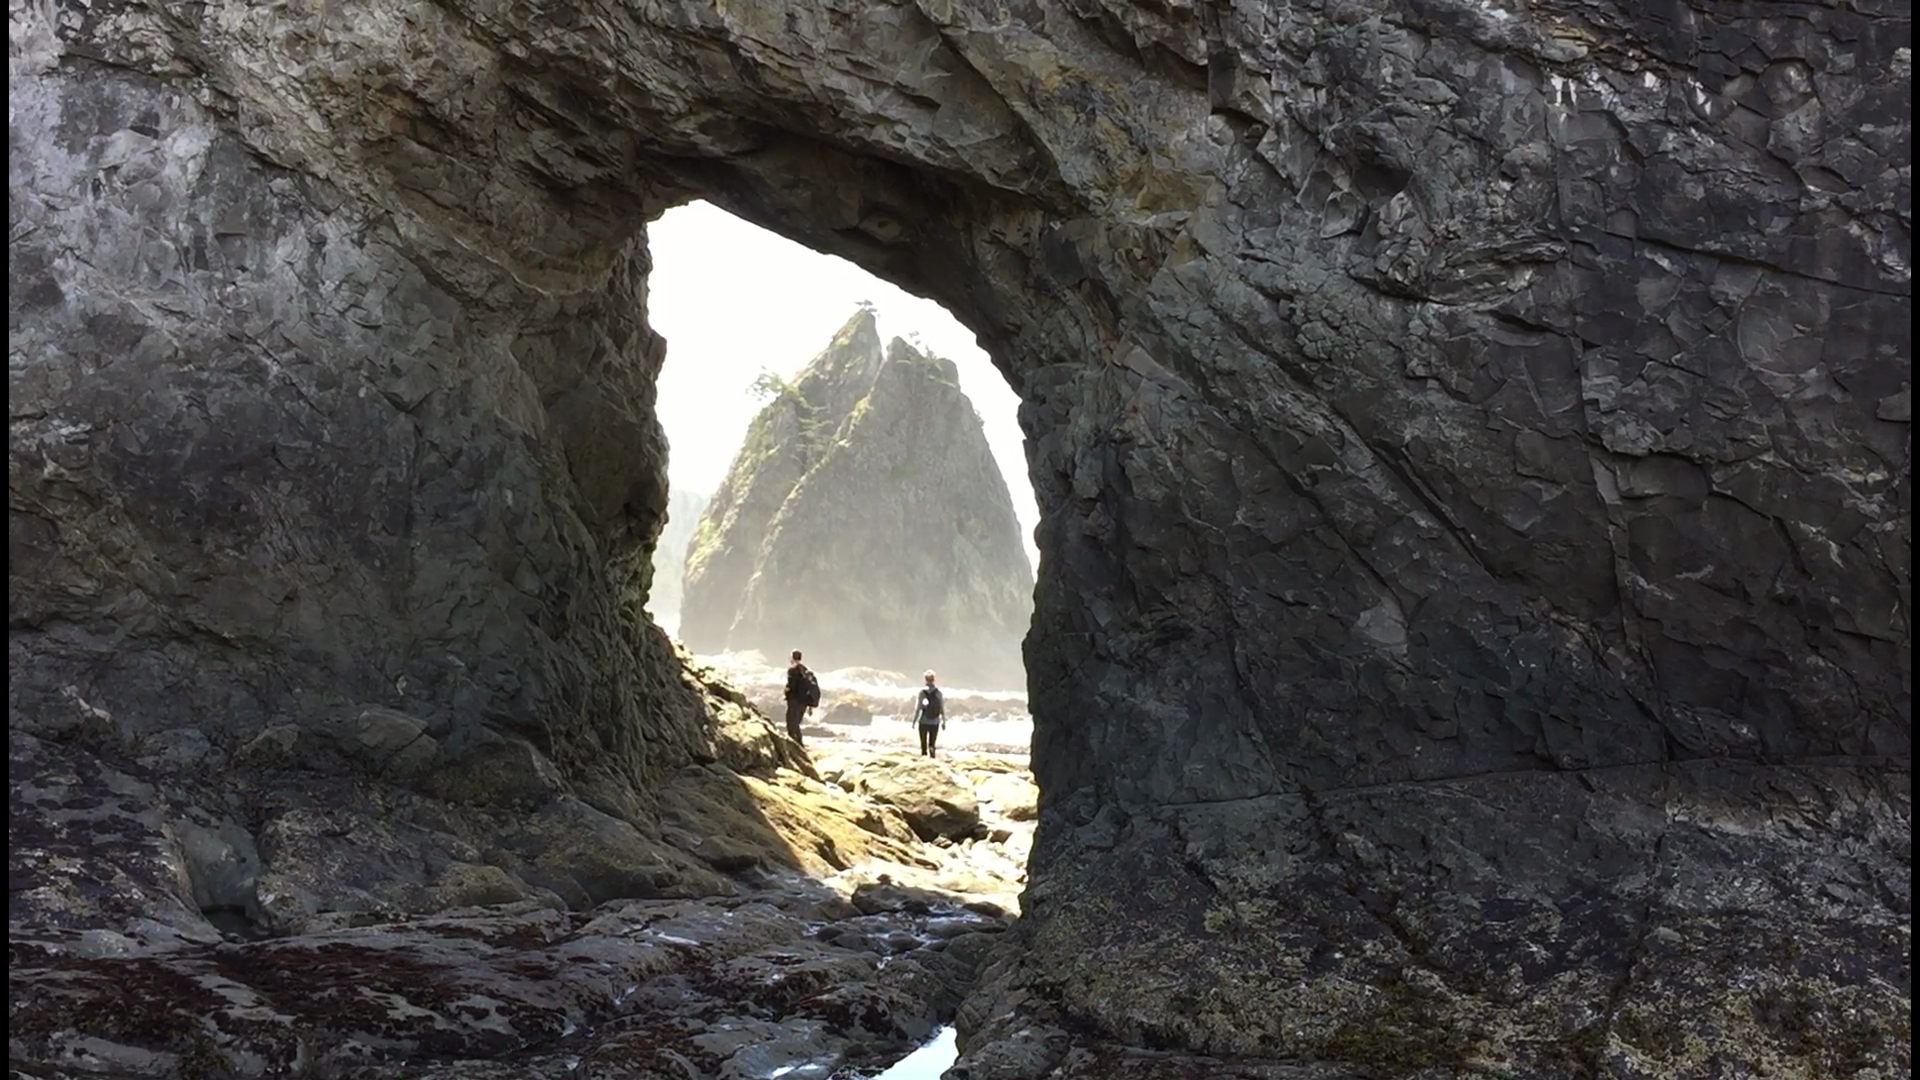 This iconic northwest spot welcomes visitors again as Olympic National Park begins re-opening. #k5evening